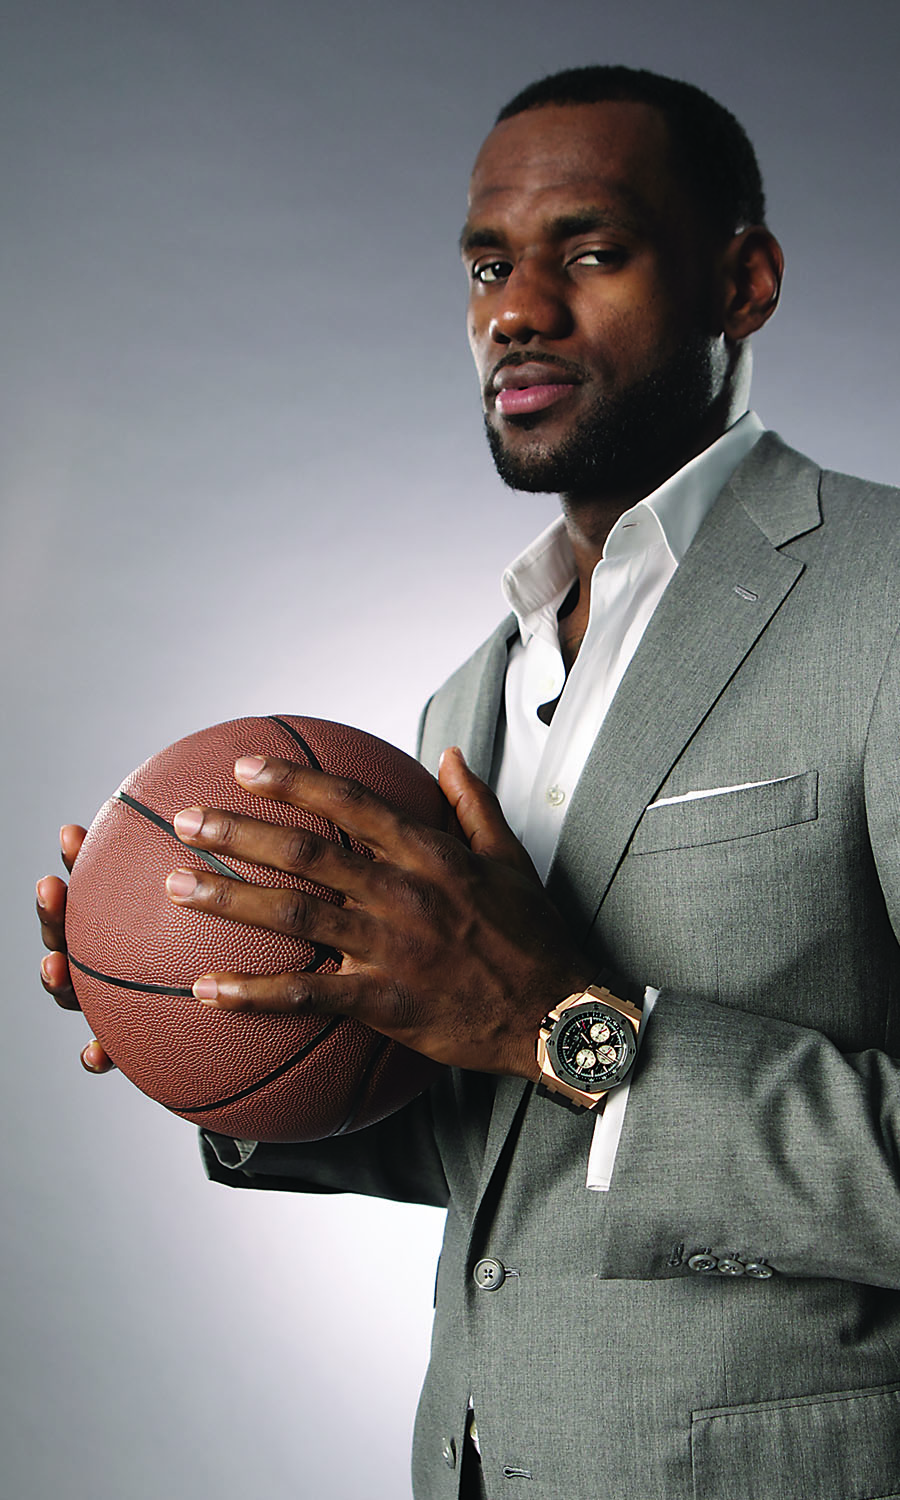 LeBron James Teams Up With Audemars Piguet, Plans to Create Limited-Edition Watch for Charity